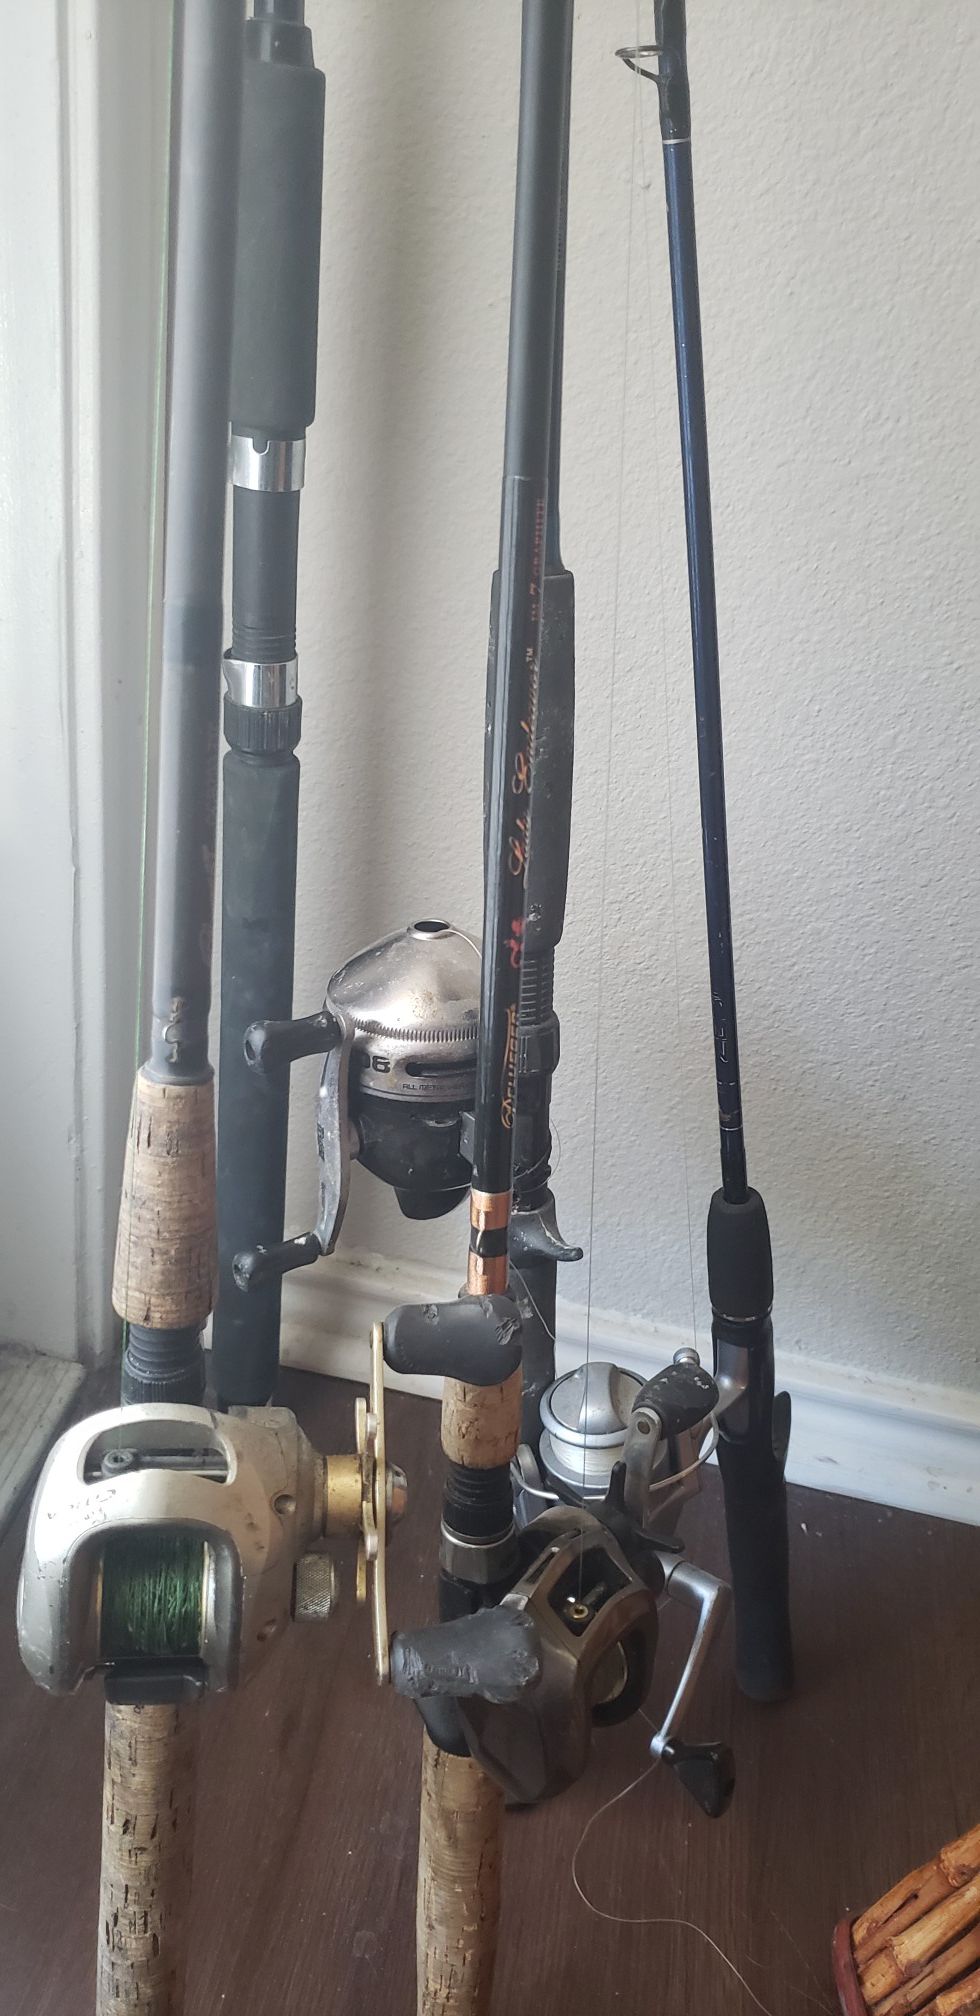 Multiple fishing poles, rods, tackle box